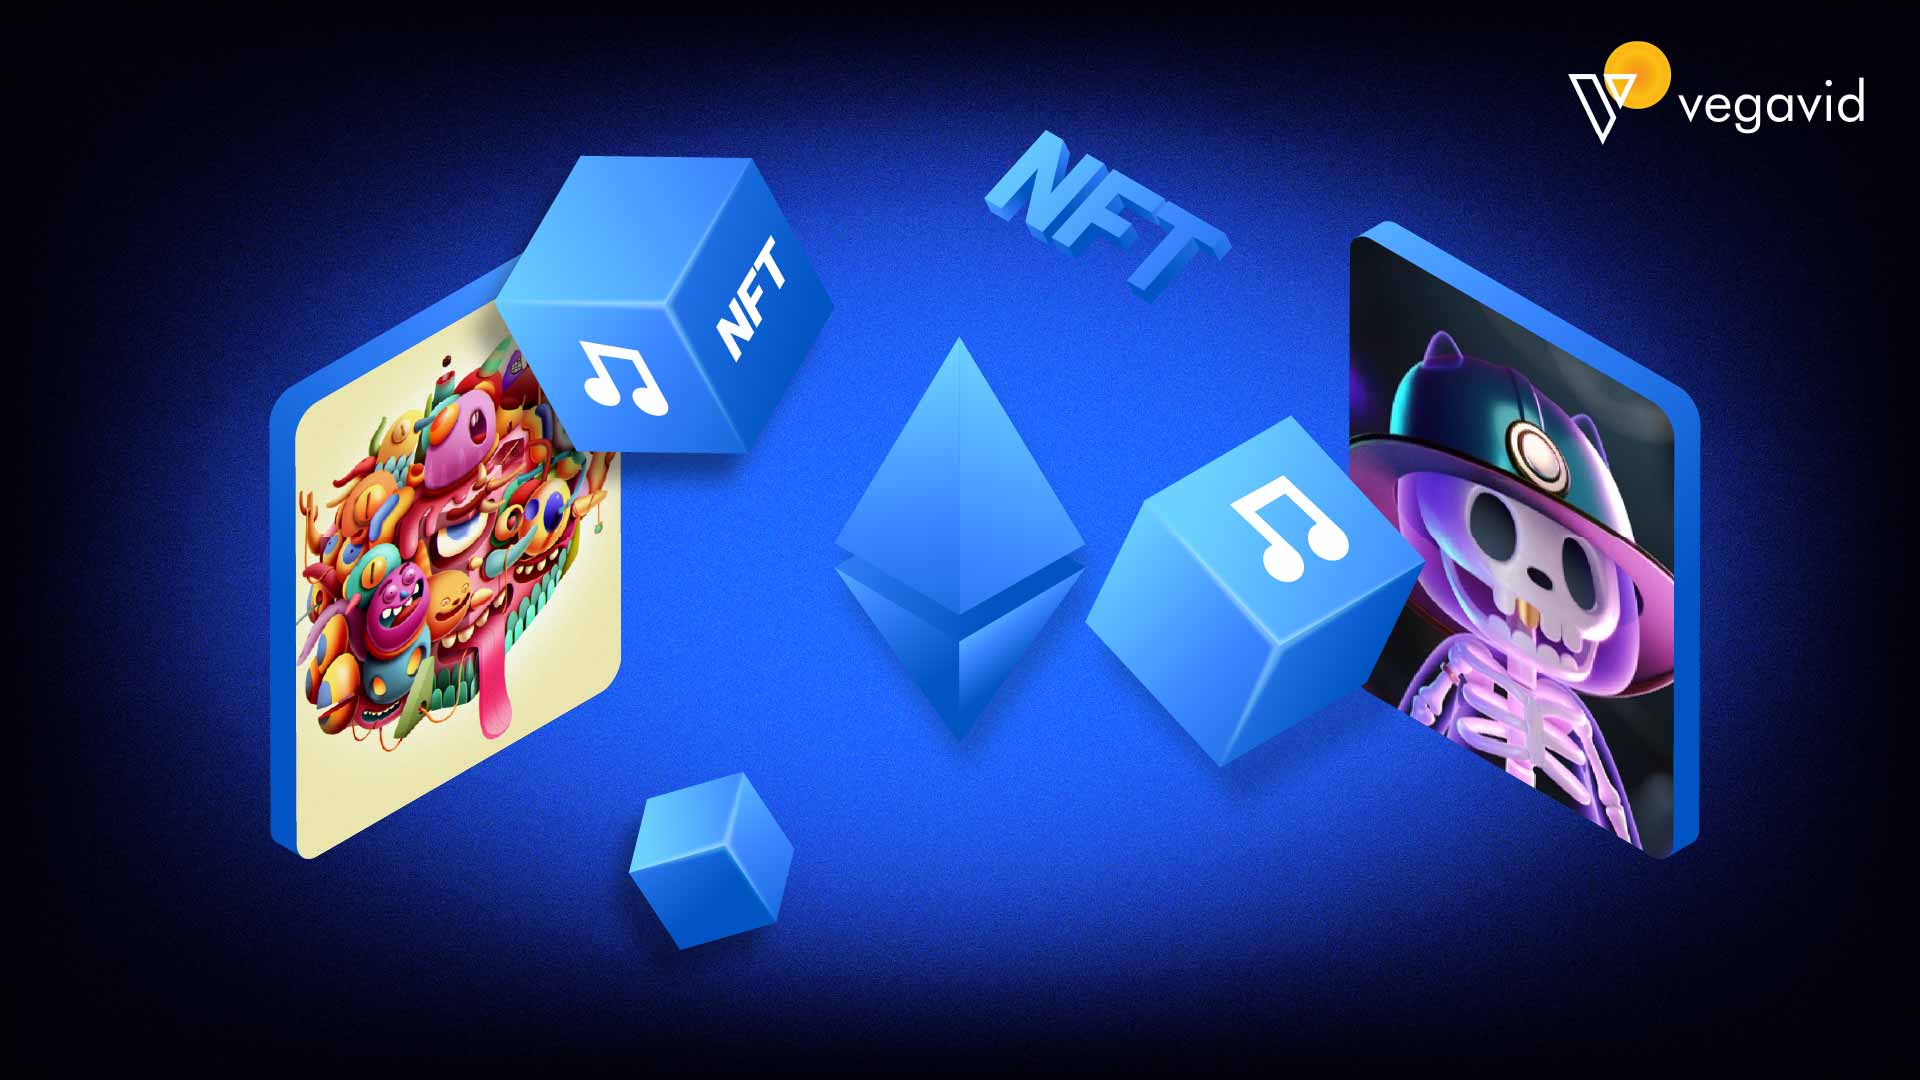 Popular Gaming Platforms are Tiptoeing Into White-label NFT Marketplaces -  Cryptoflies News